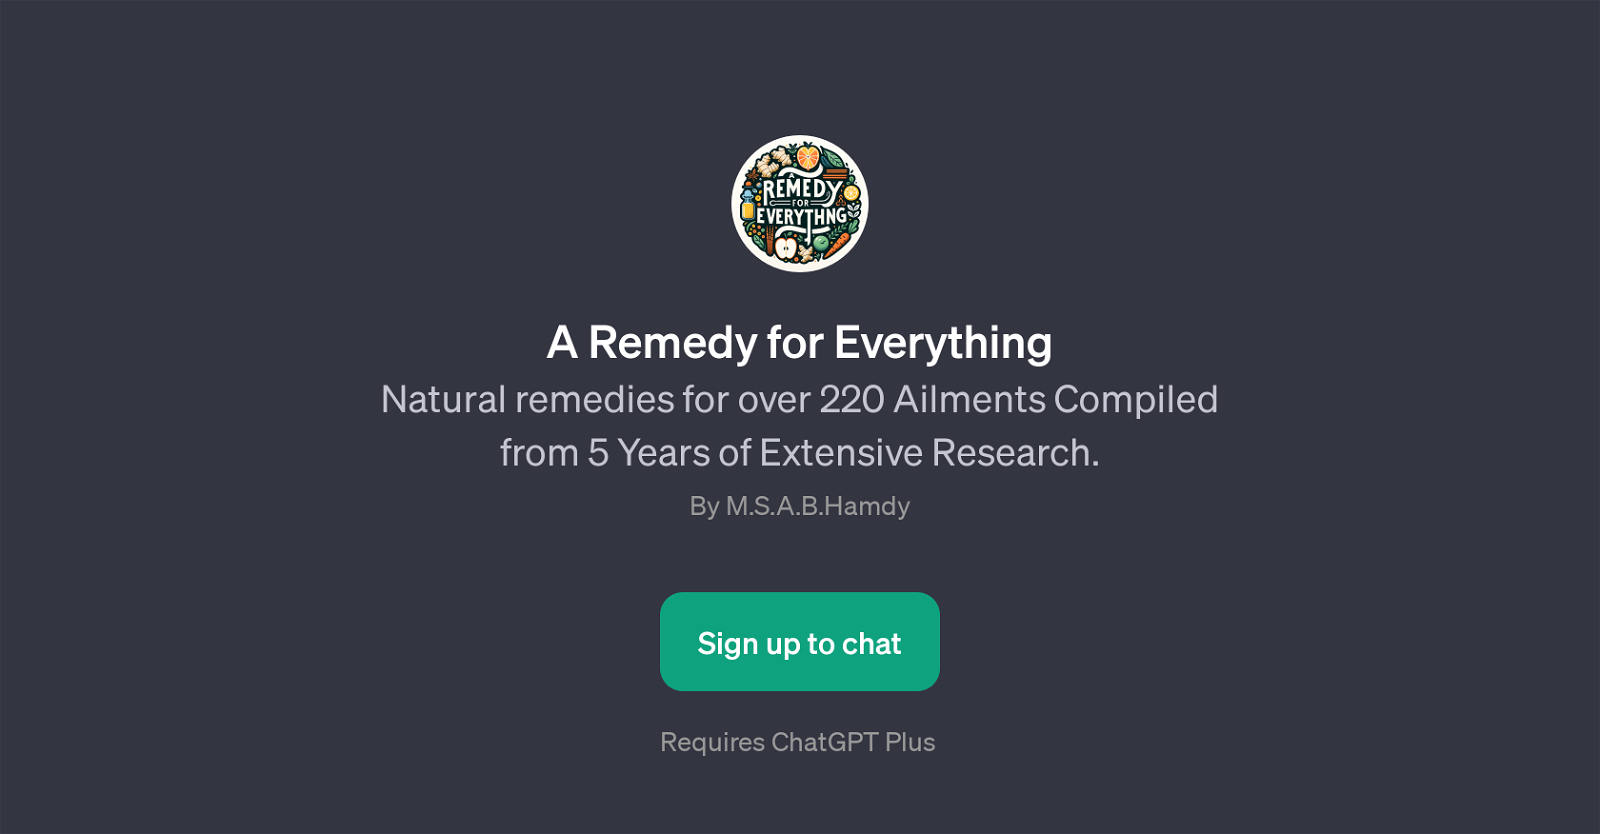 A Remedy for Everything website